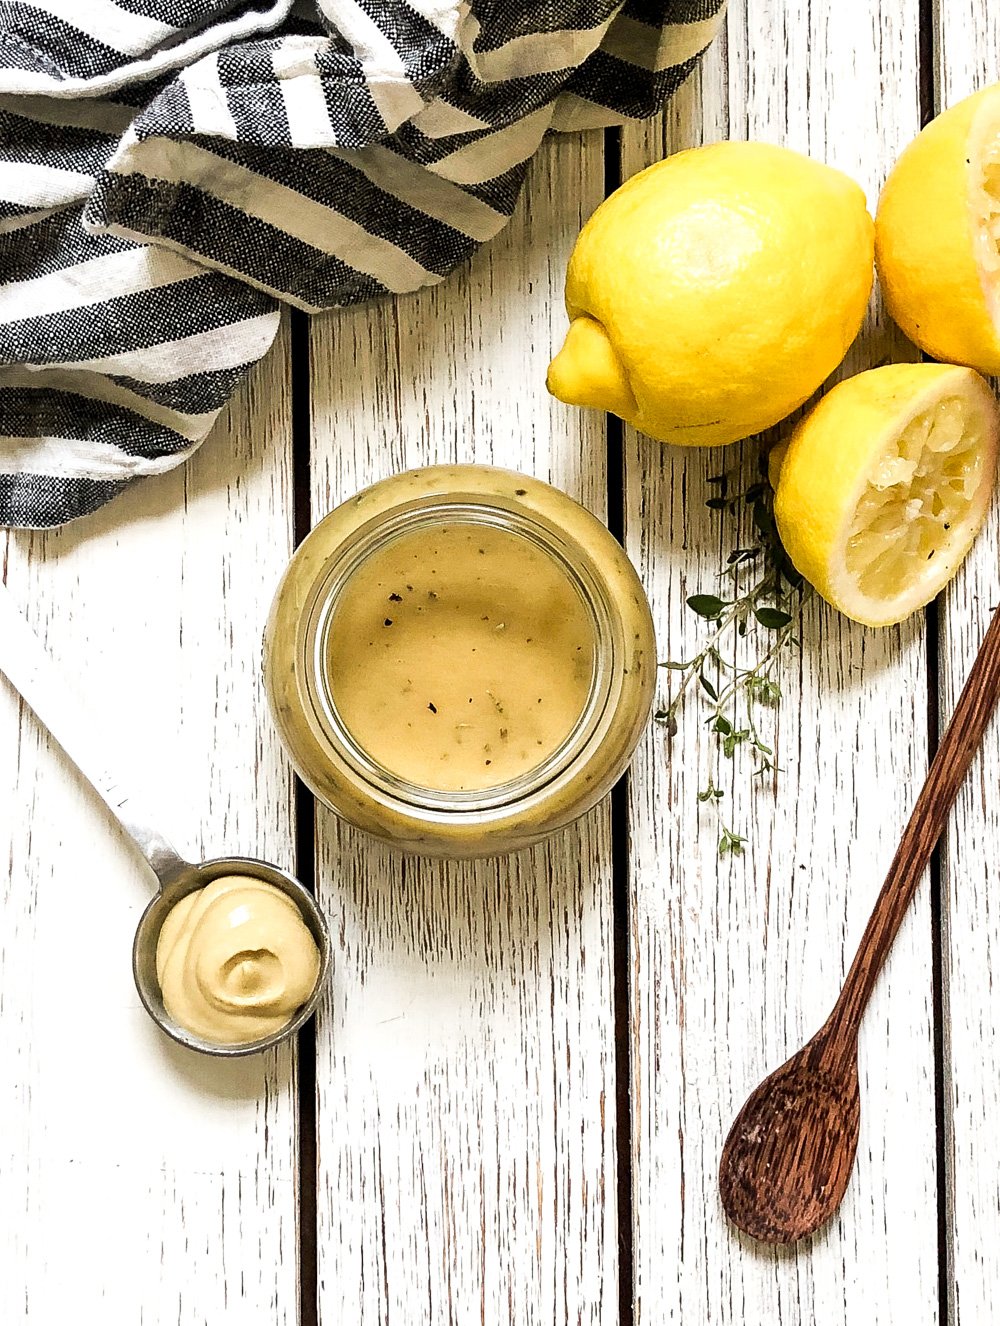 Lifestyle blogger Chocolate and Lace shares her recipe for Honey Lemon Dijon Dressing.